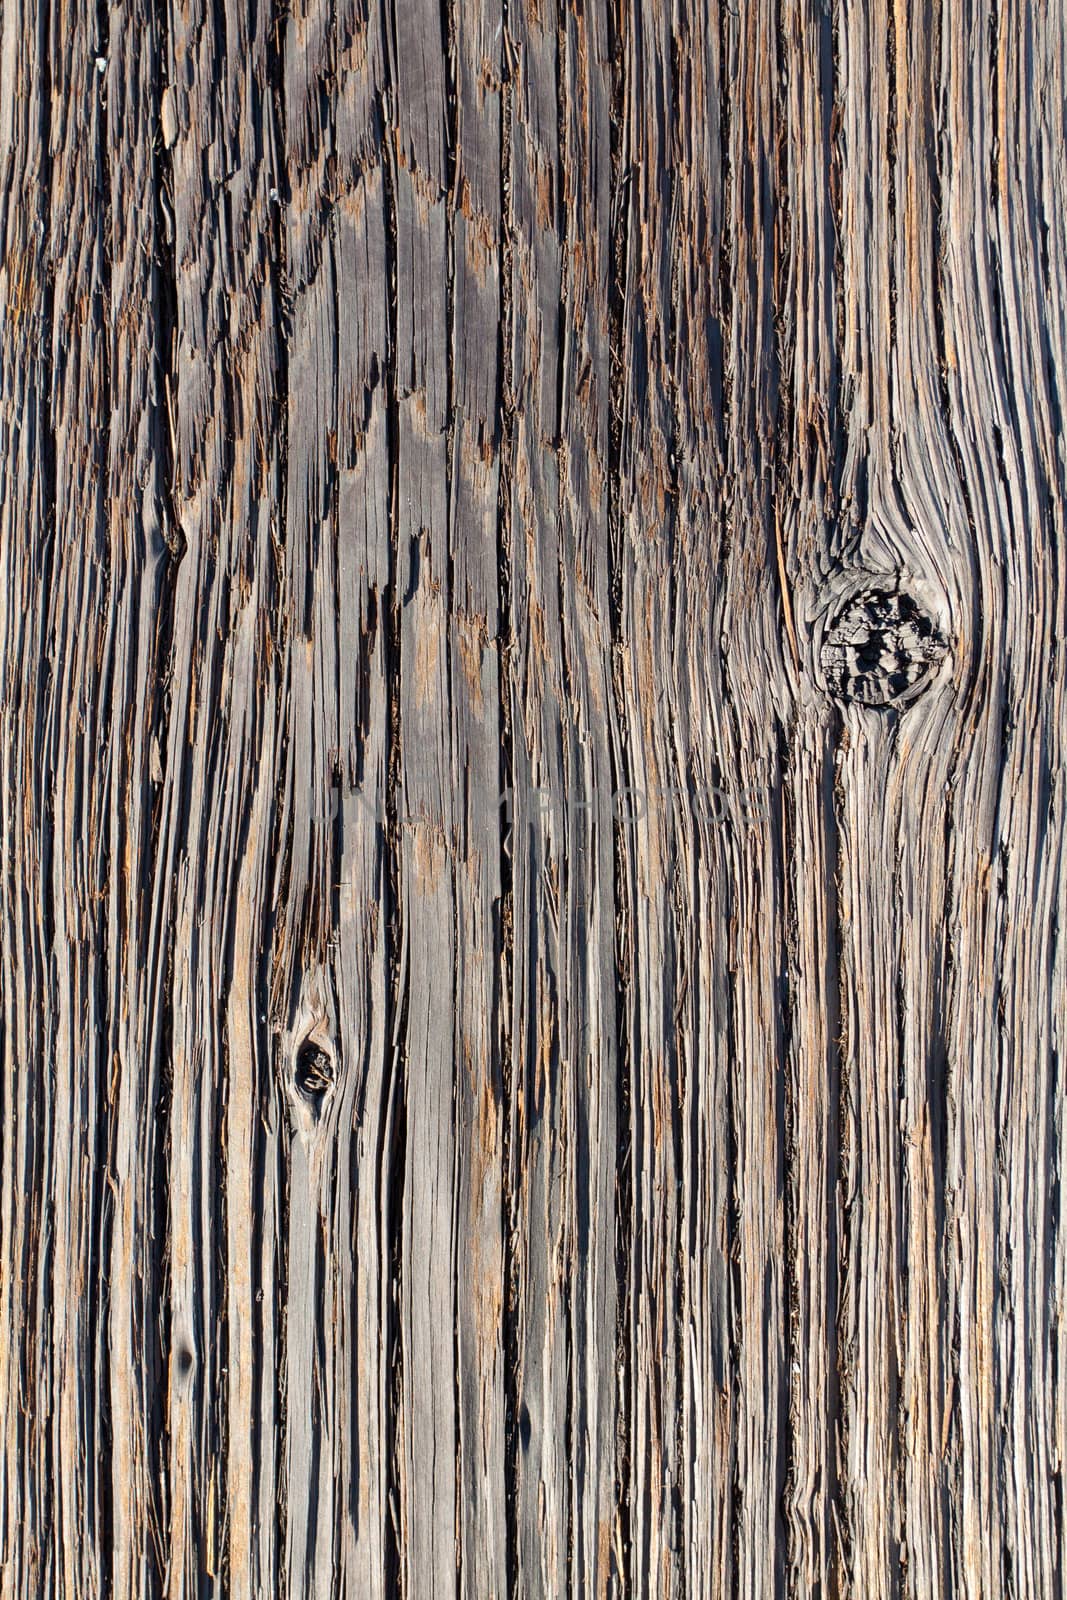 Abstract Wood Texture by joshuaraineyphotography